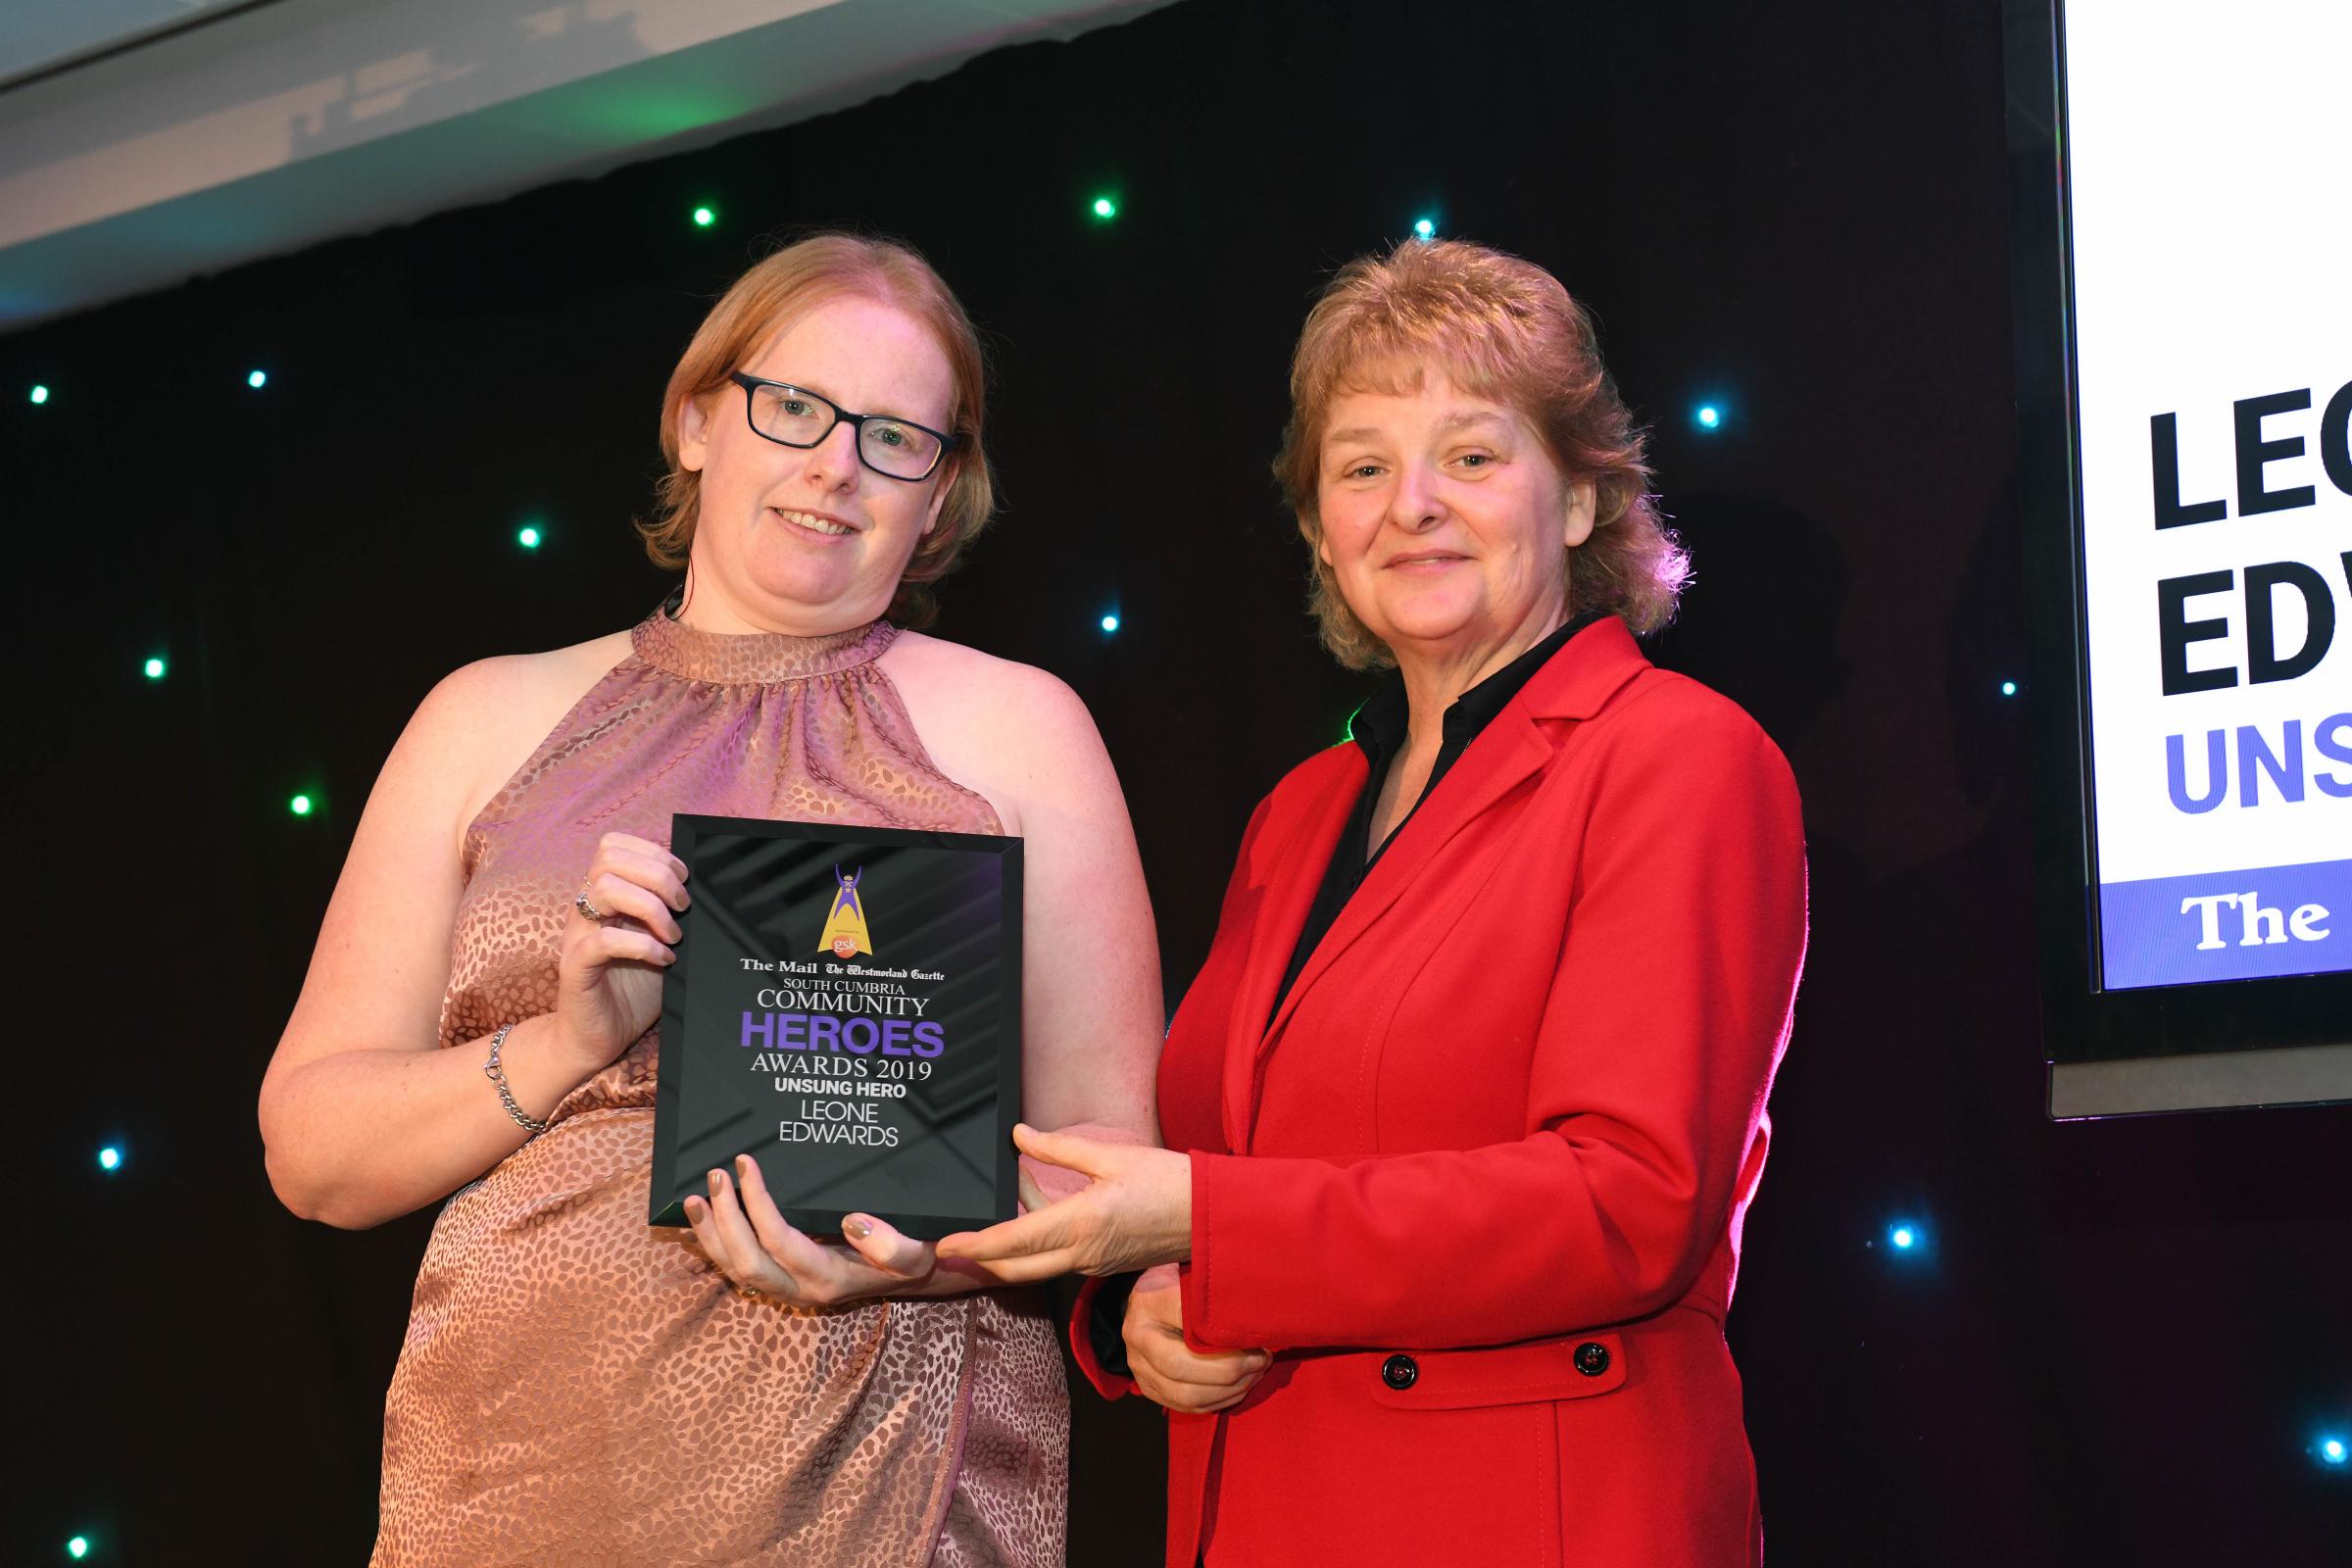 WINNER: Leone Awards receives the unsung hero award at the south Cumbria event held in 2019